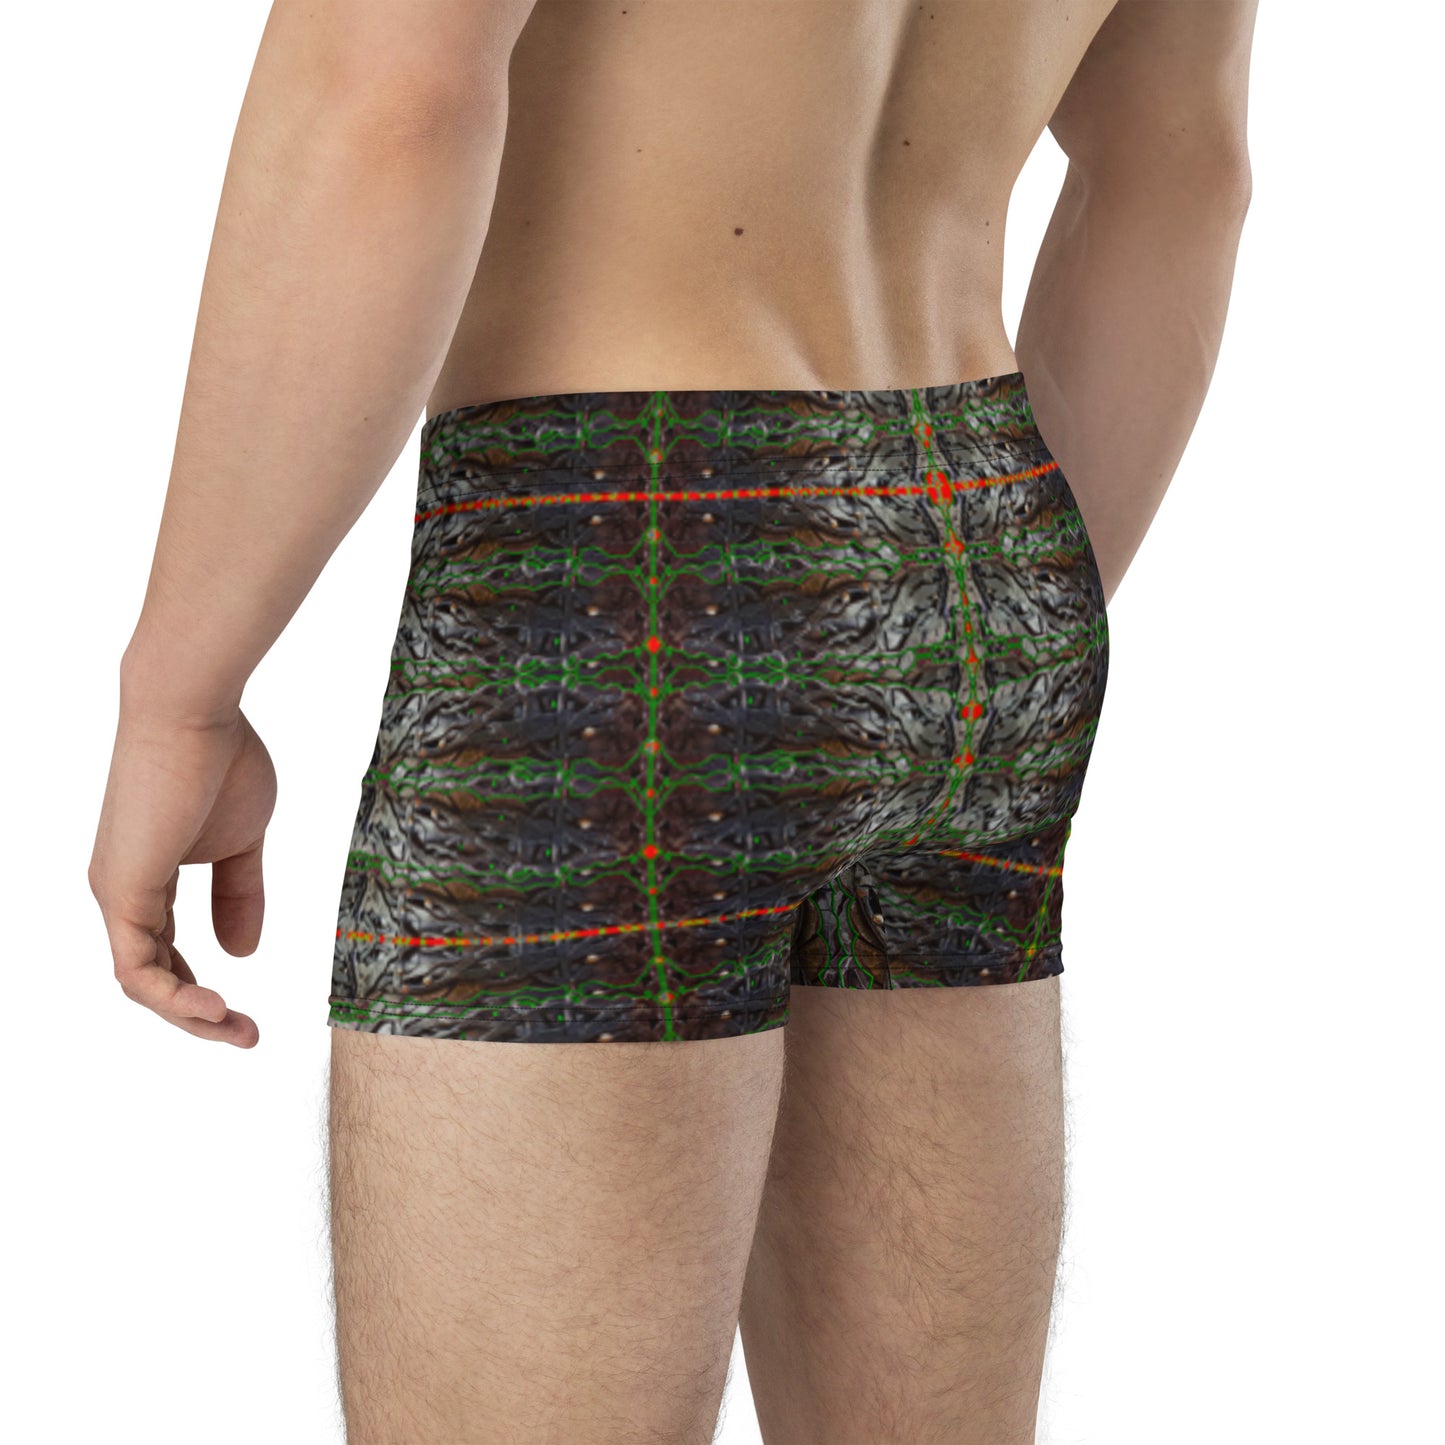 Boxer Briefs (His/They)(Rind#2 Tree Link) RJSTH@Fabric#2 RJSTHW2021 RJS